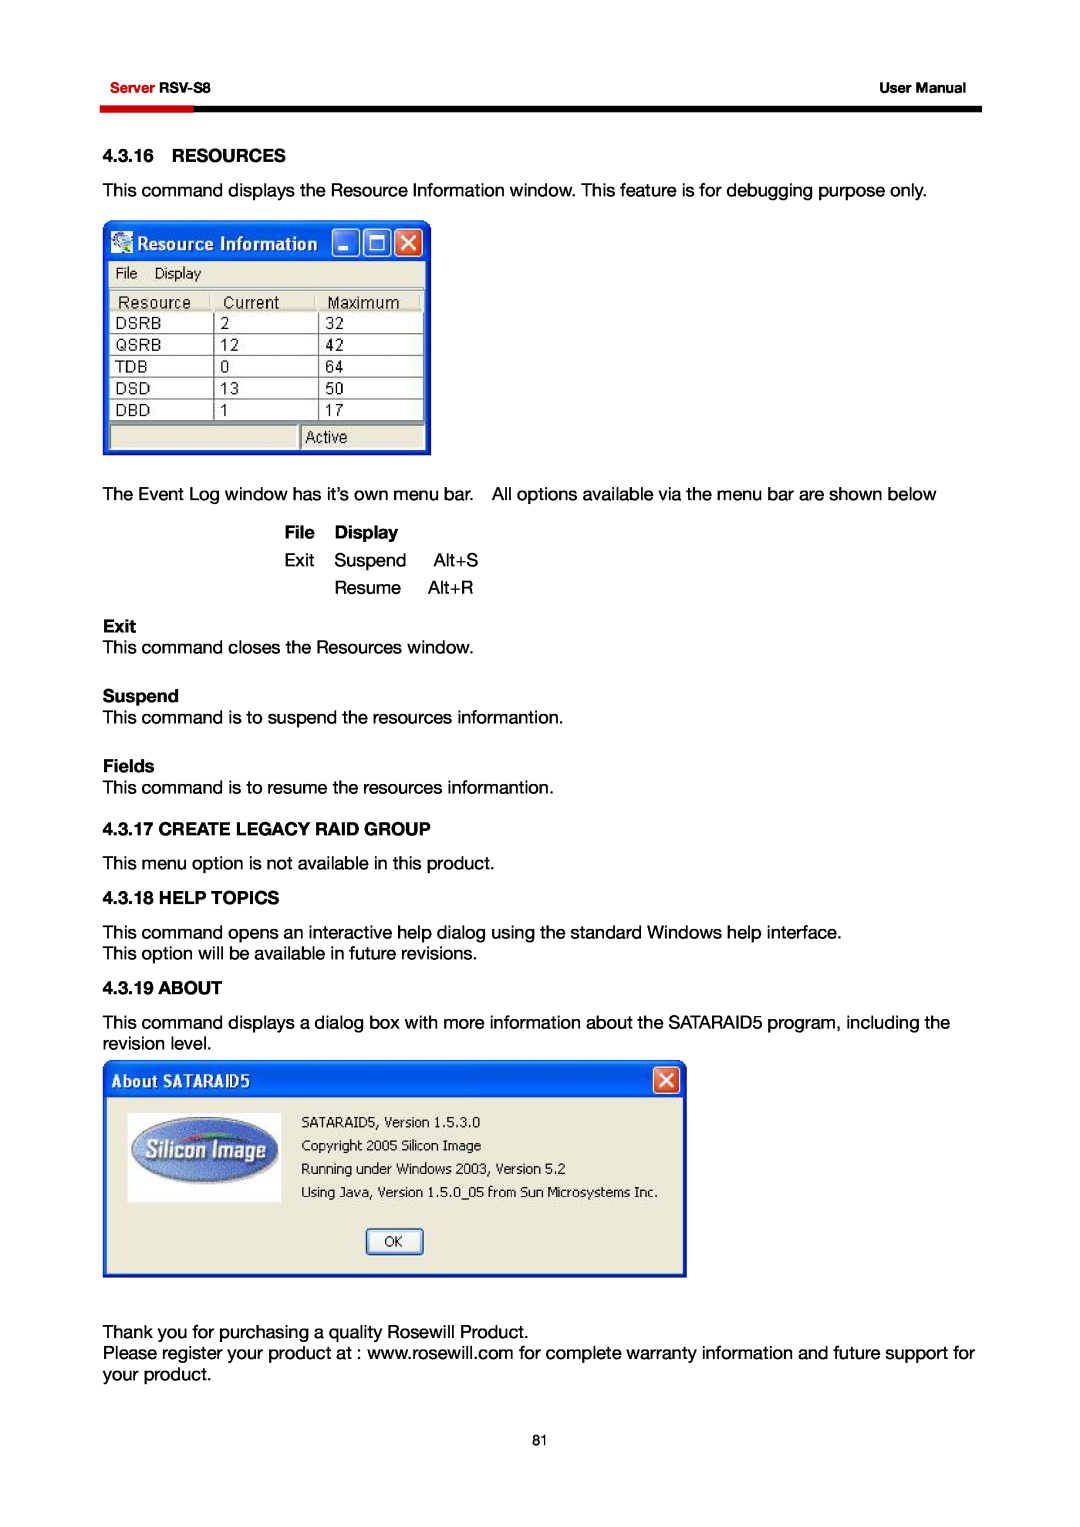 Rosewill RSV-S8 user manual Resources, File Display, Create Legacy Raid Group, Help Topics, About, Exit, Suspend, Fields 